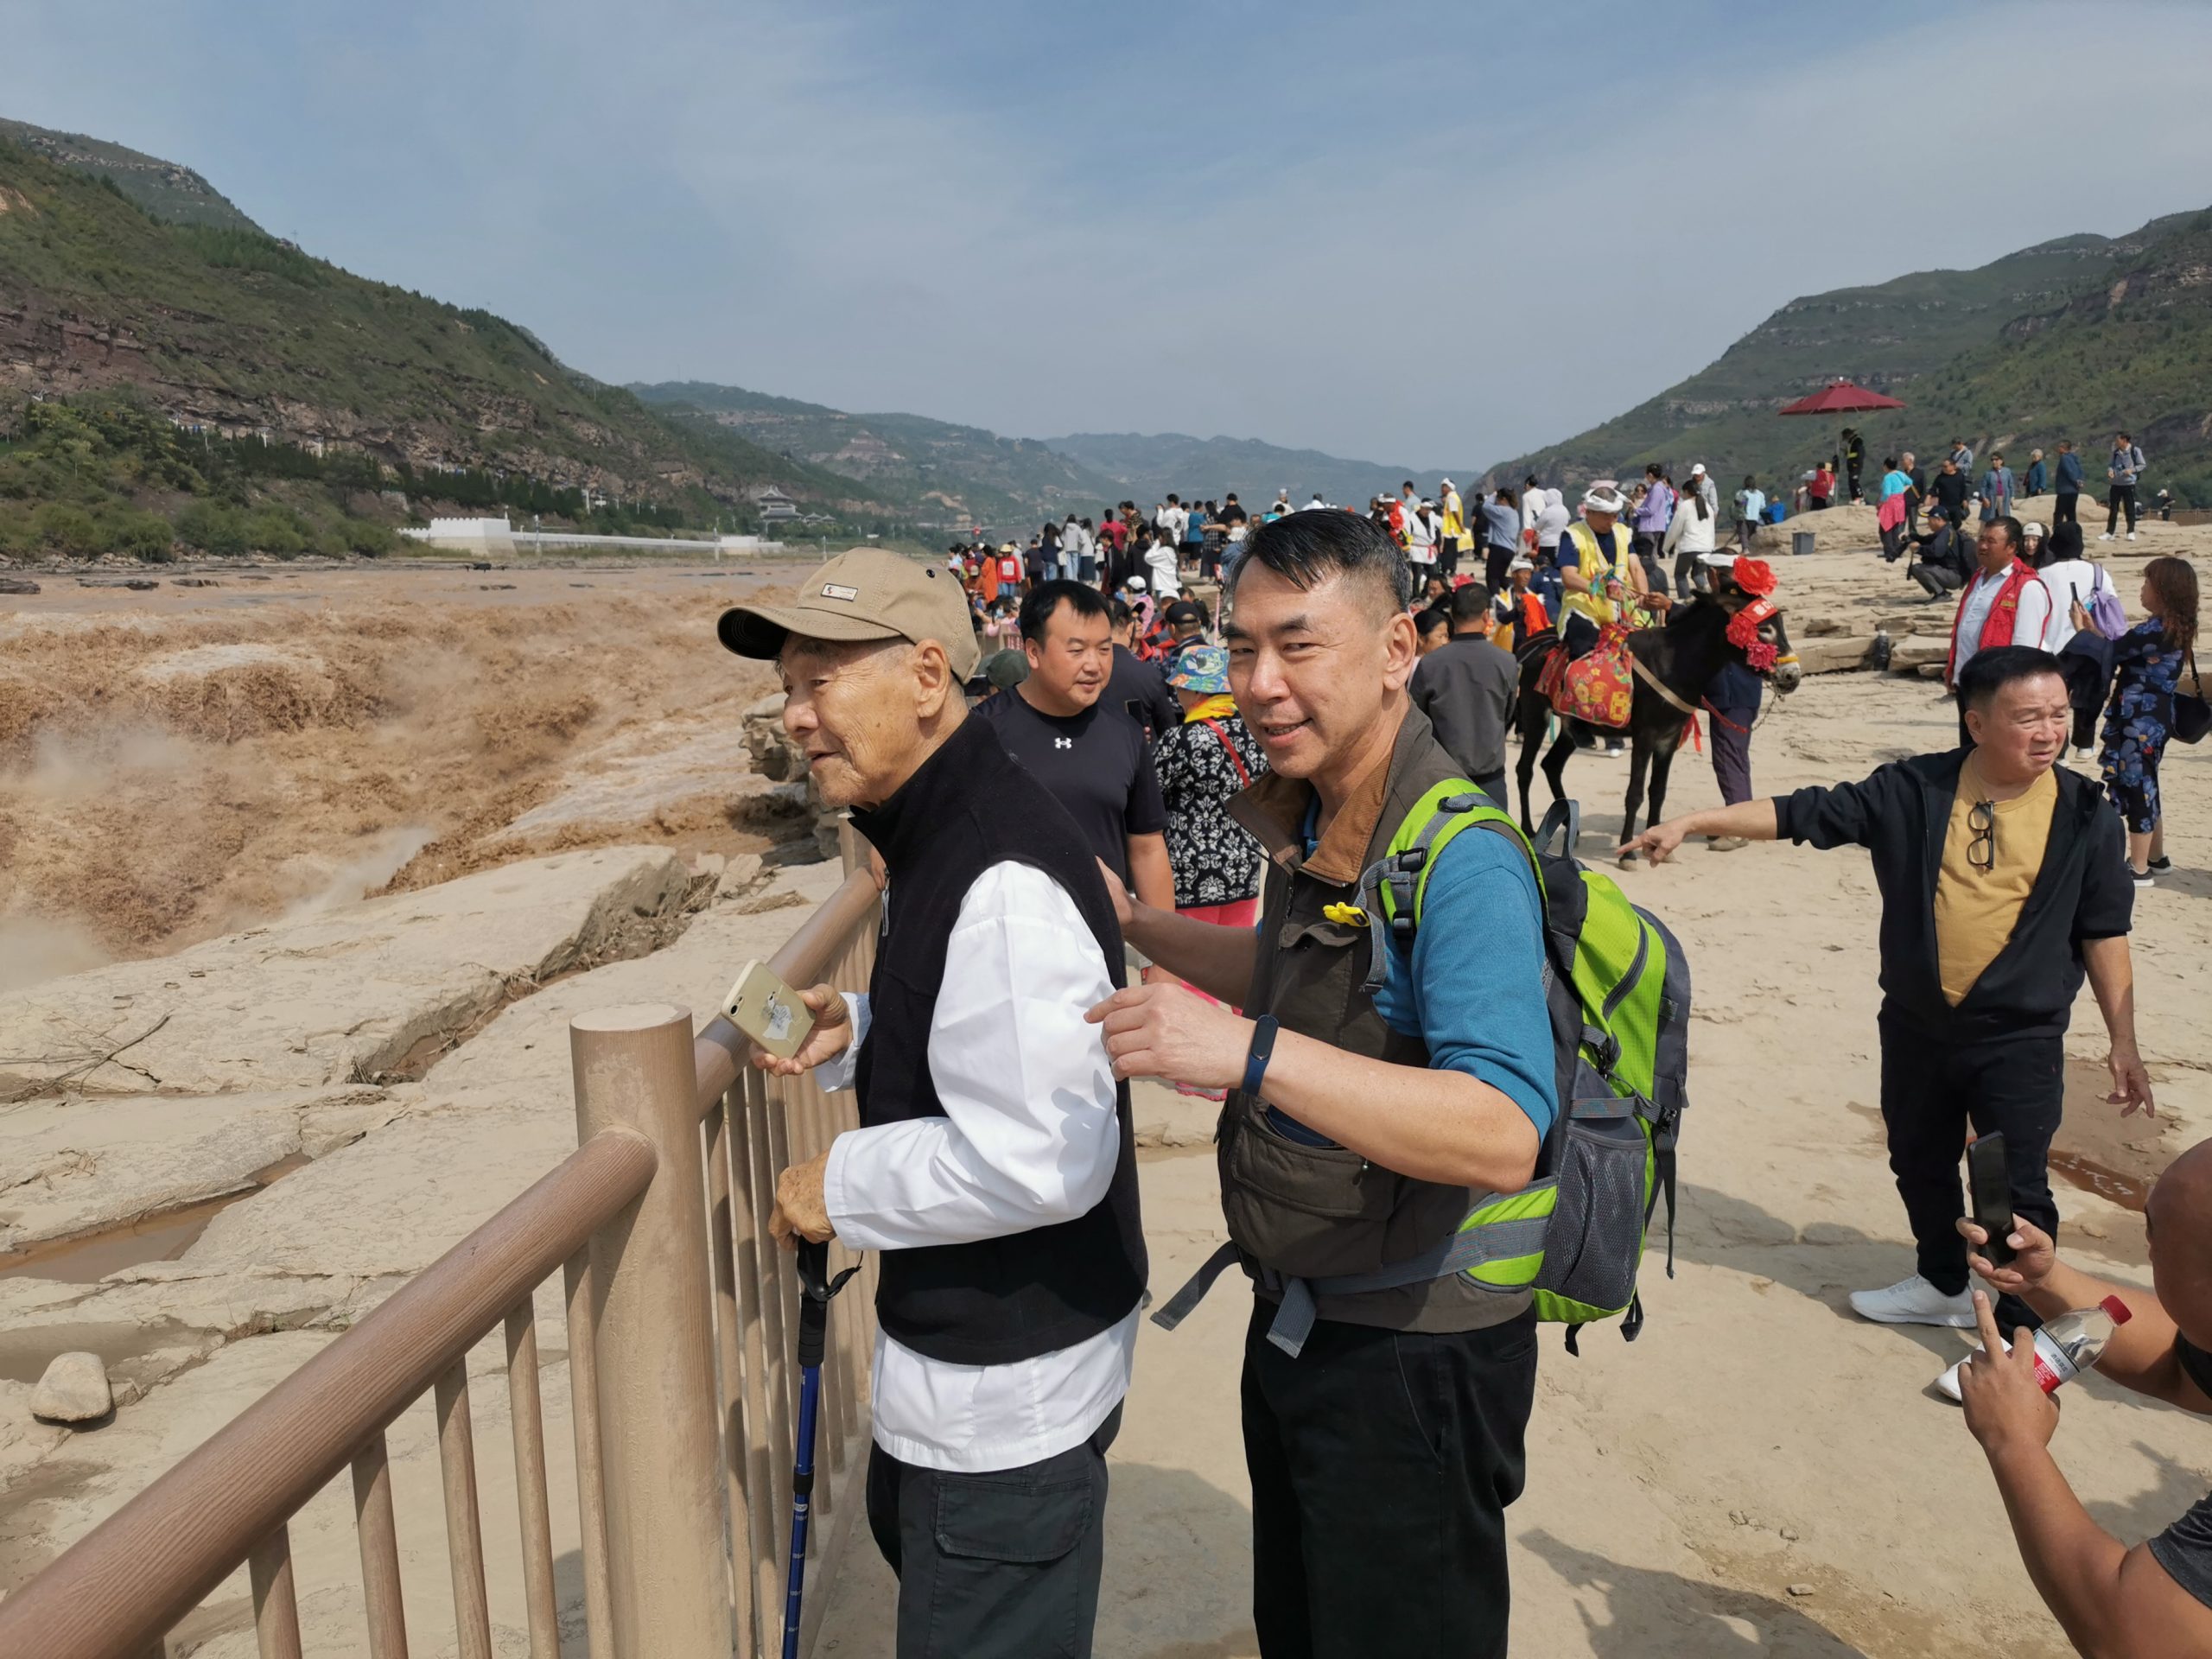 Lu Chuanyao accompanied his 88-year-old father Lu Zuoshen on a trip to Shanxi. The father and son enjoyed the spectacular scenery of the Yellow River's mouth.